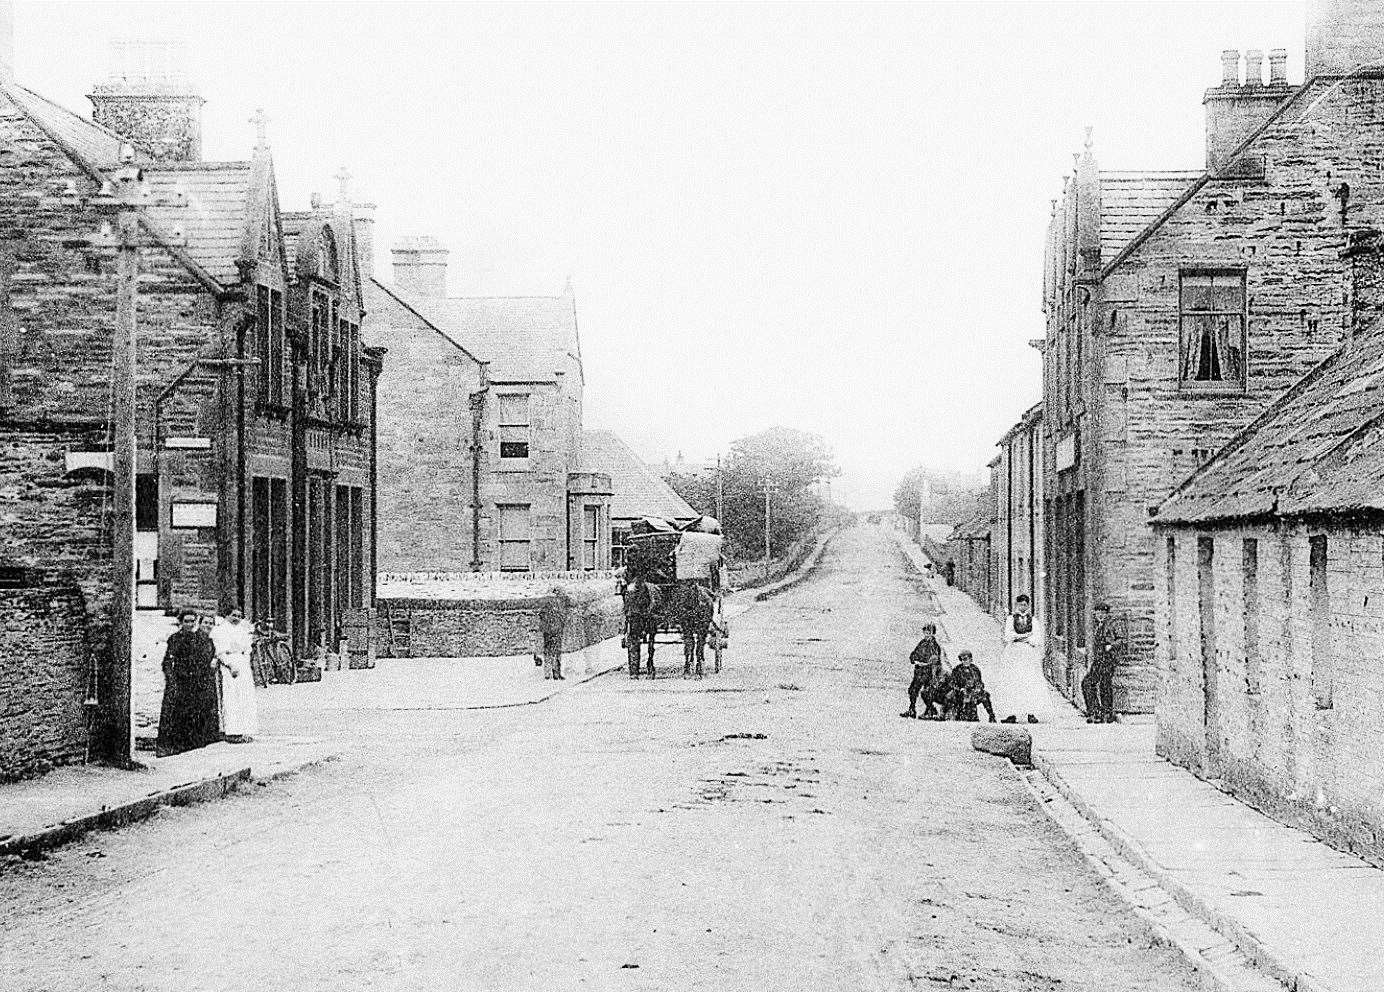 Castletown looking west with a horse-drawn coach approaching the building which is now the Castletown Hotel. The flagstone house on the right has long since been demolished.